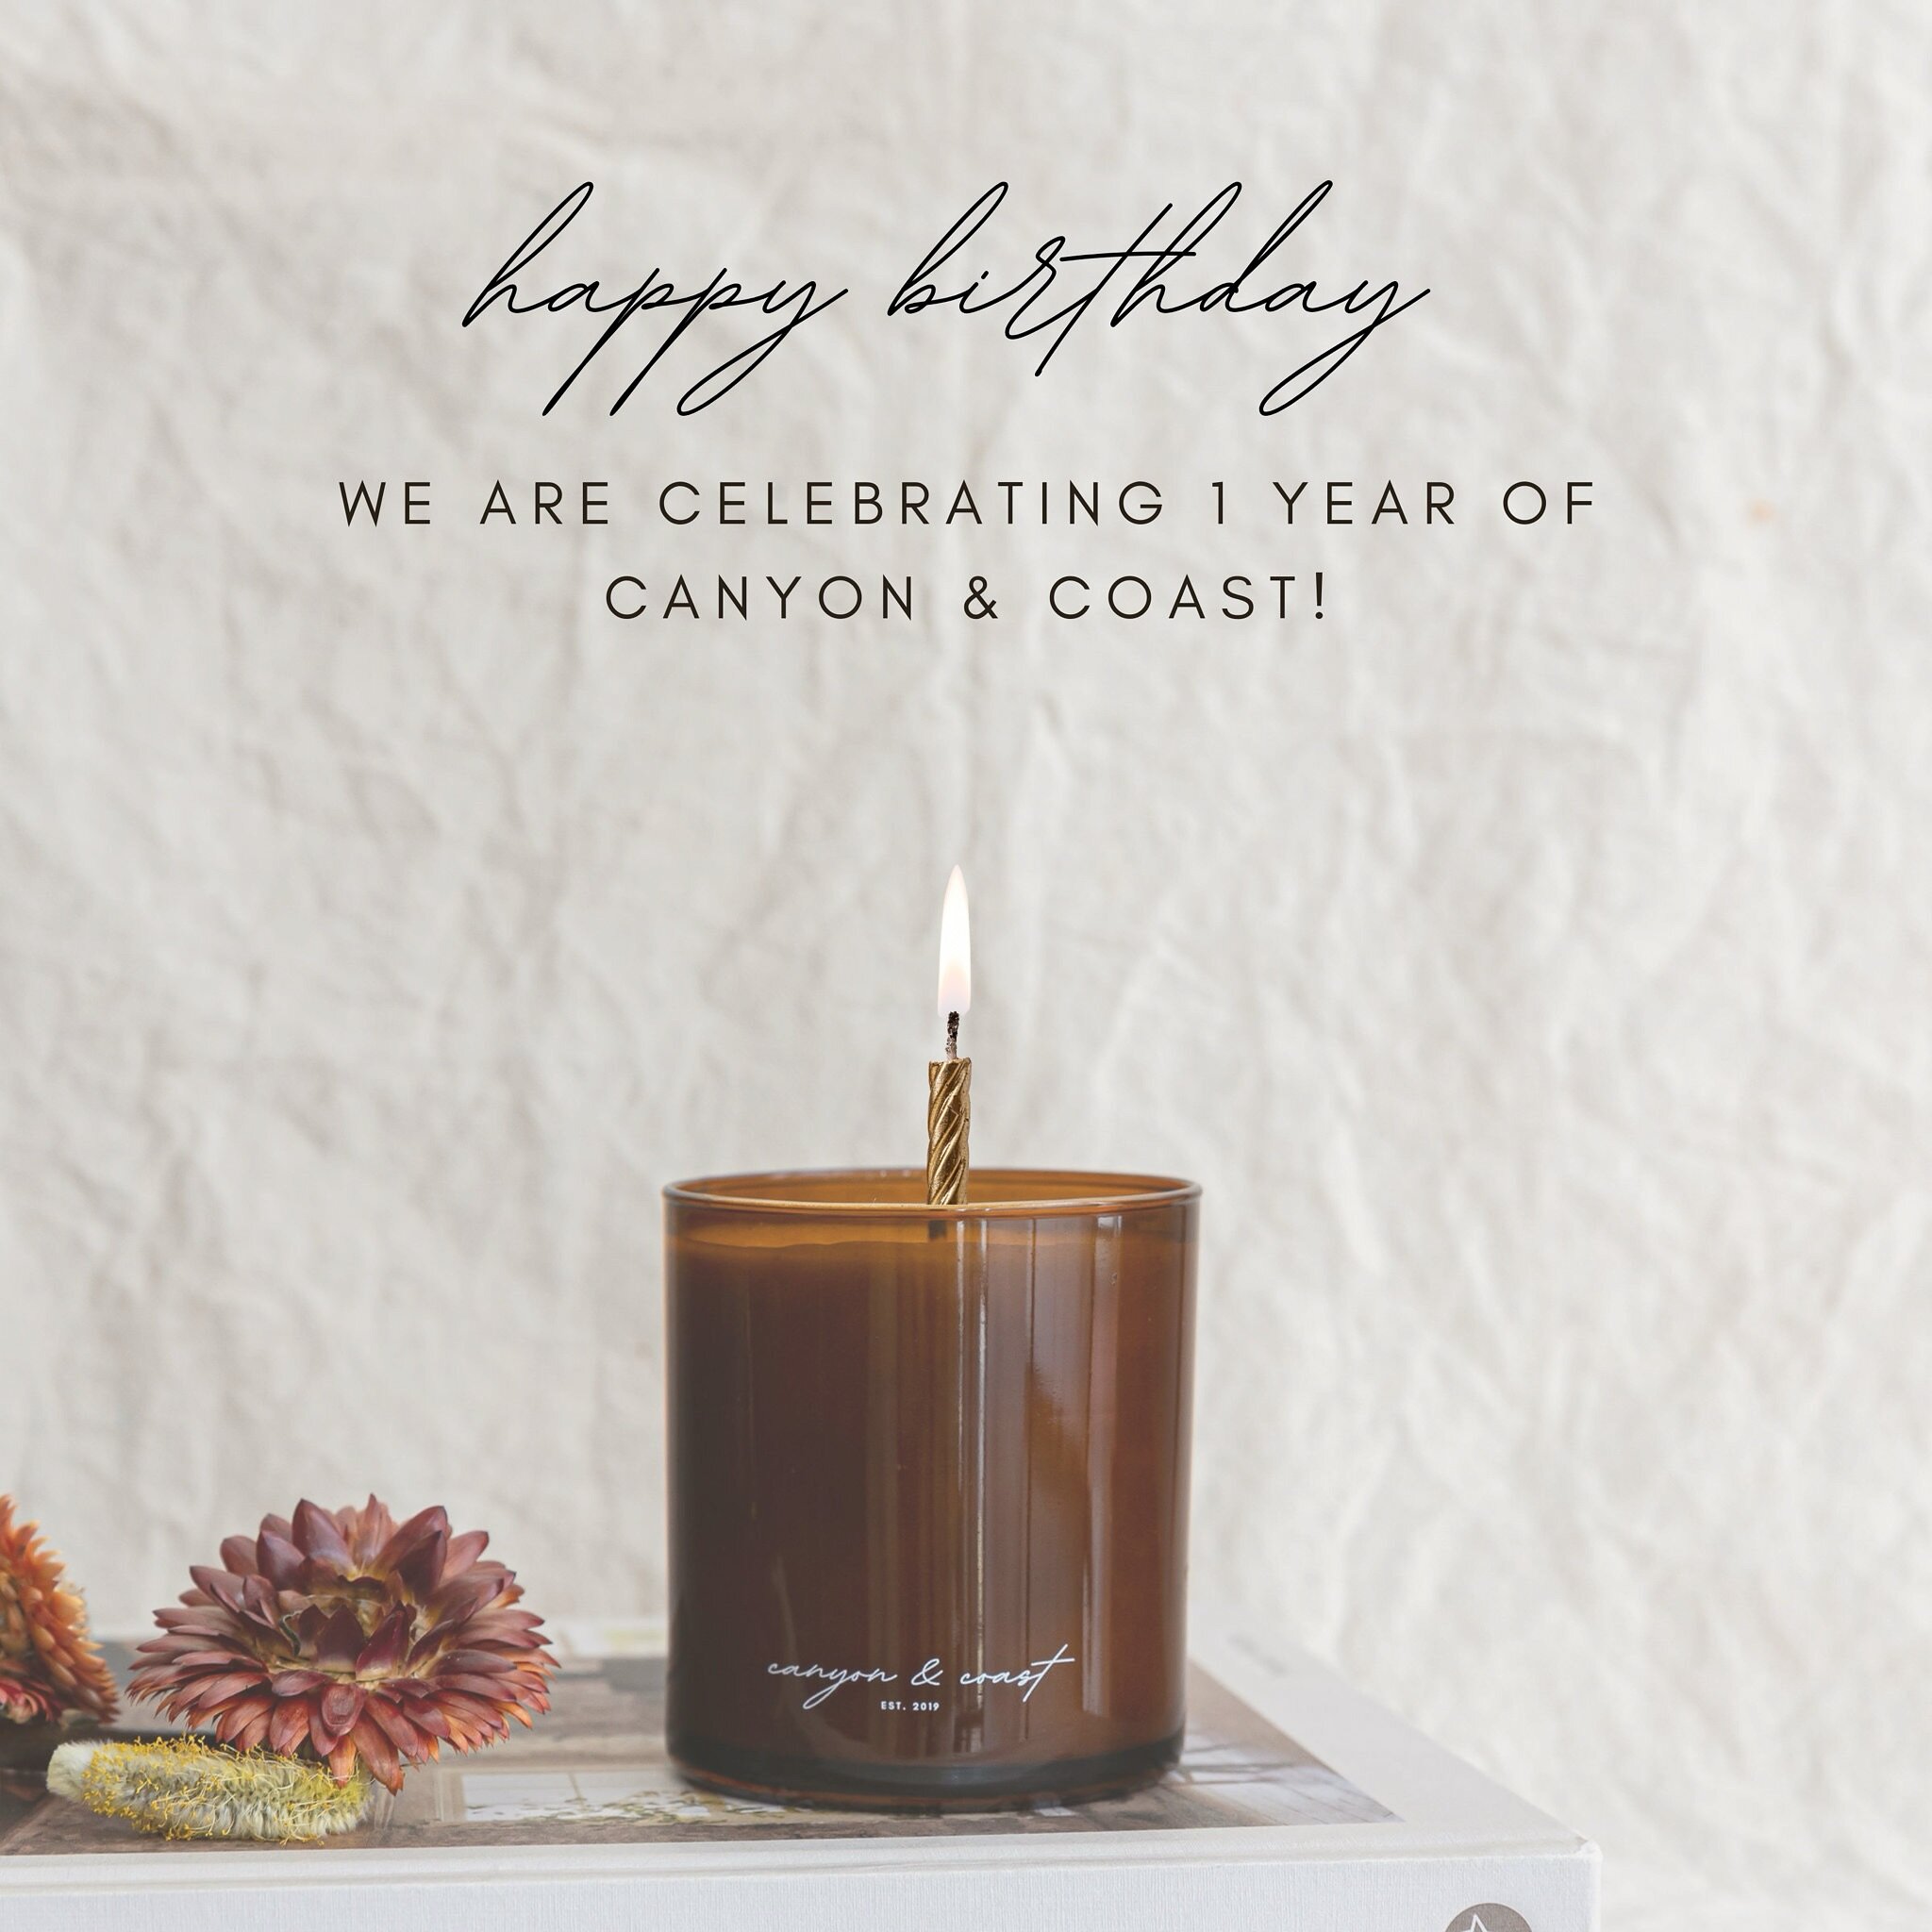 IT&rsquo;S OUR BIRTHDAY!! 🎉 It&rsquo;s been 1 whole year since our very first launch and to celebrate and say THANKS for your support we&rsquo;re giving you 15% OFF! It&rsquo;s the perfect time to stock up on your favorite candles. Use code BIRTHDAY